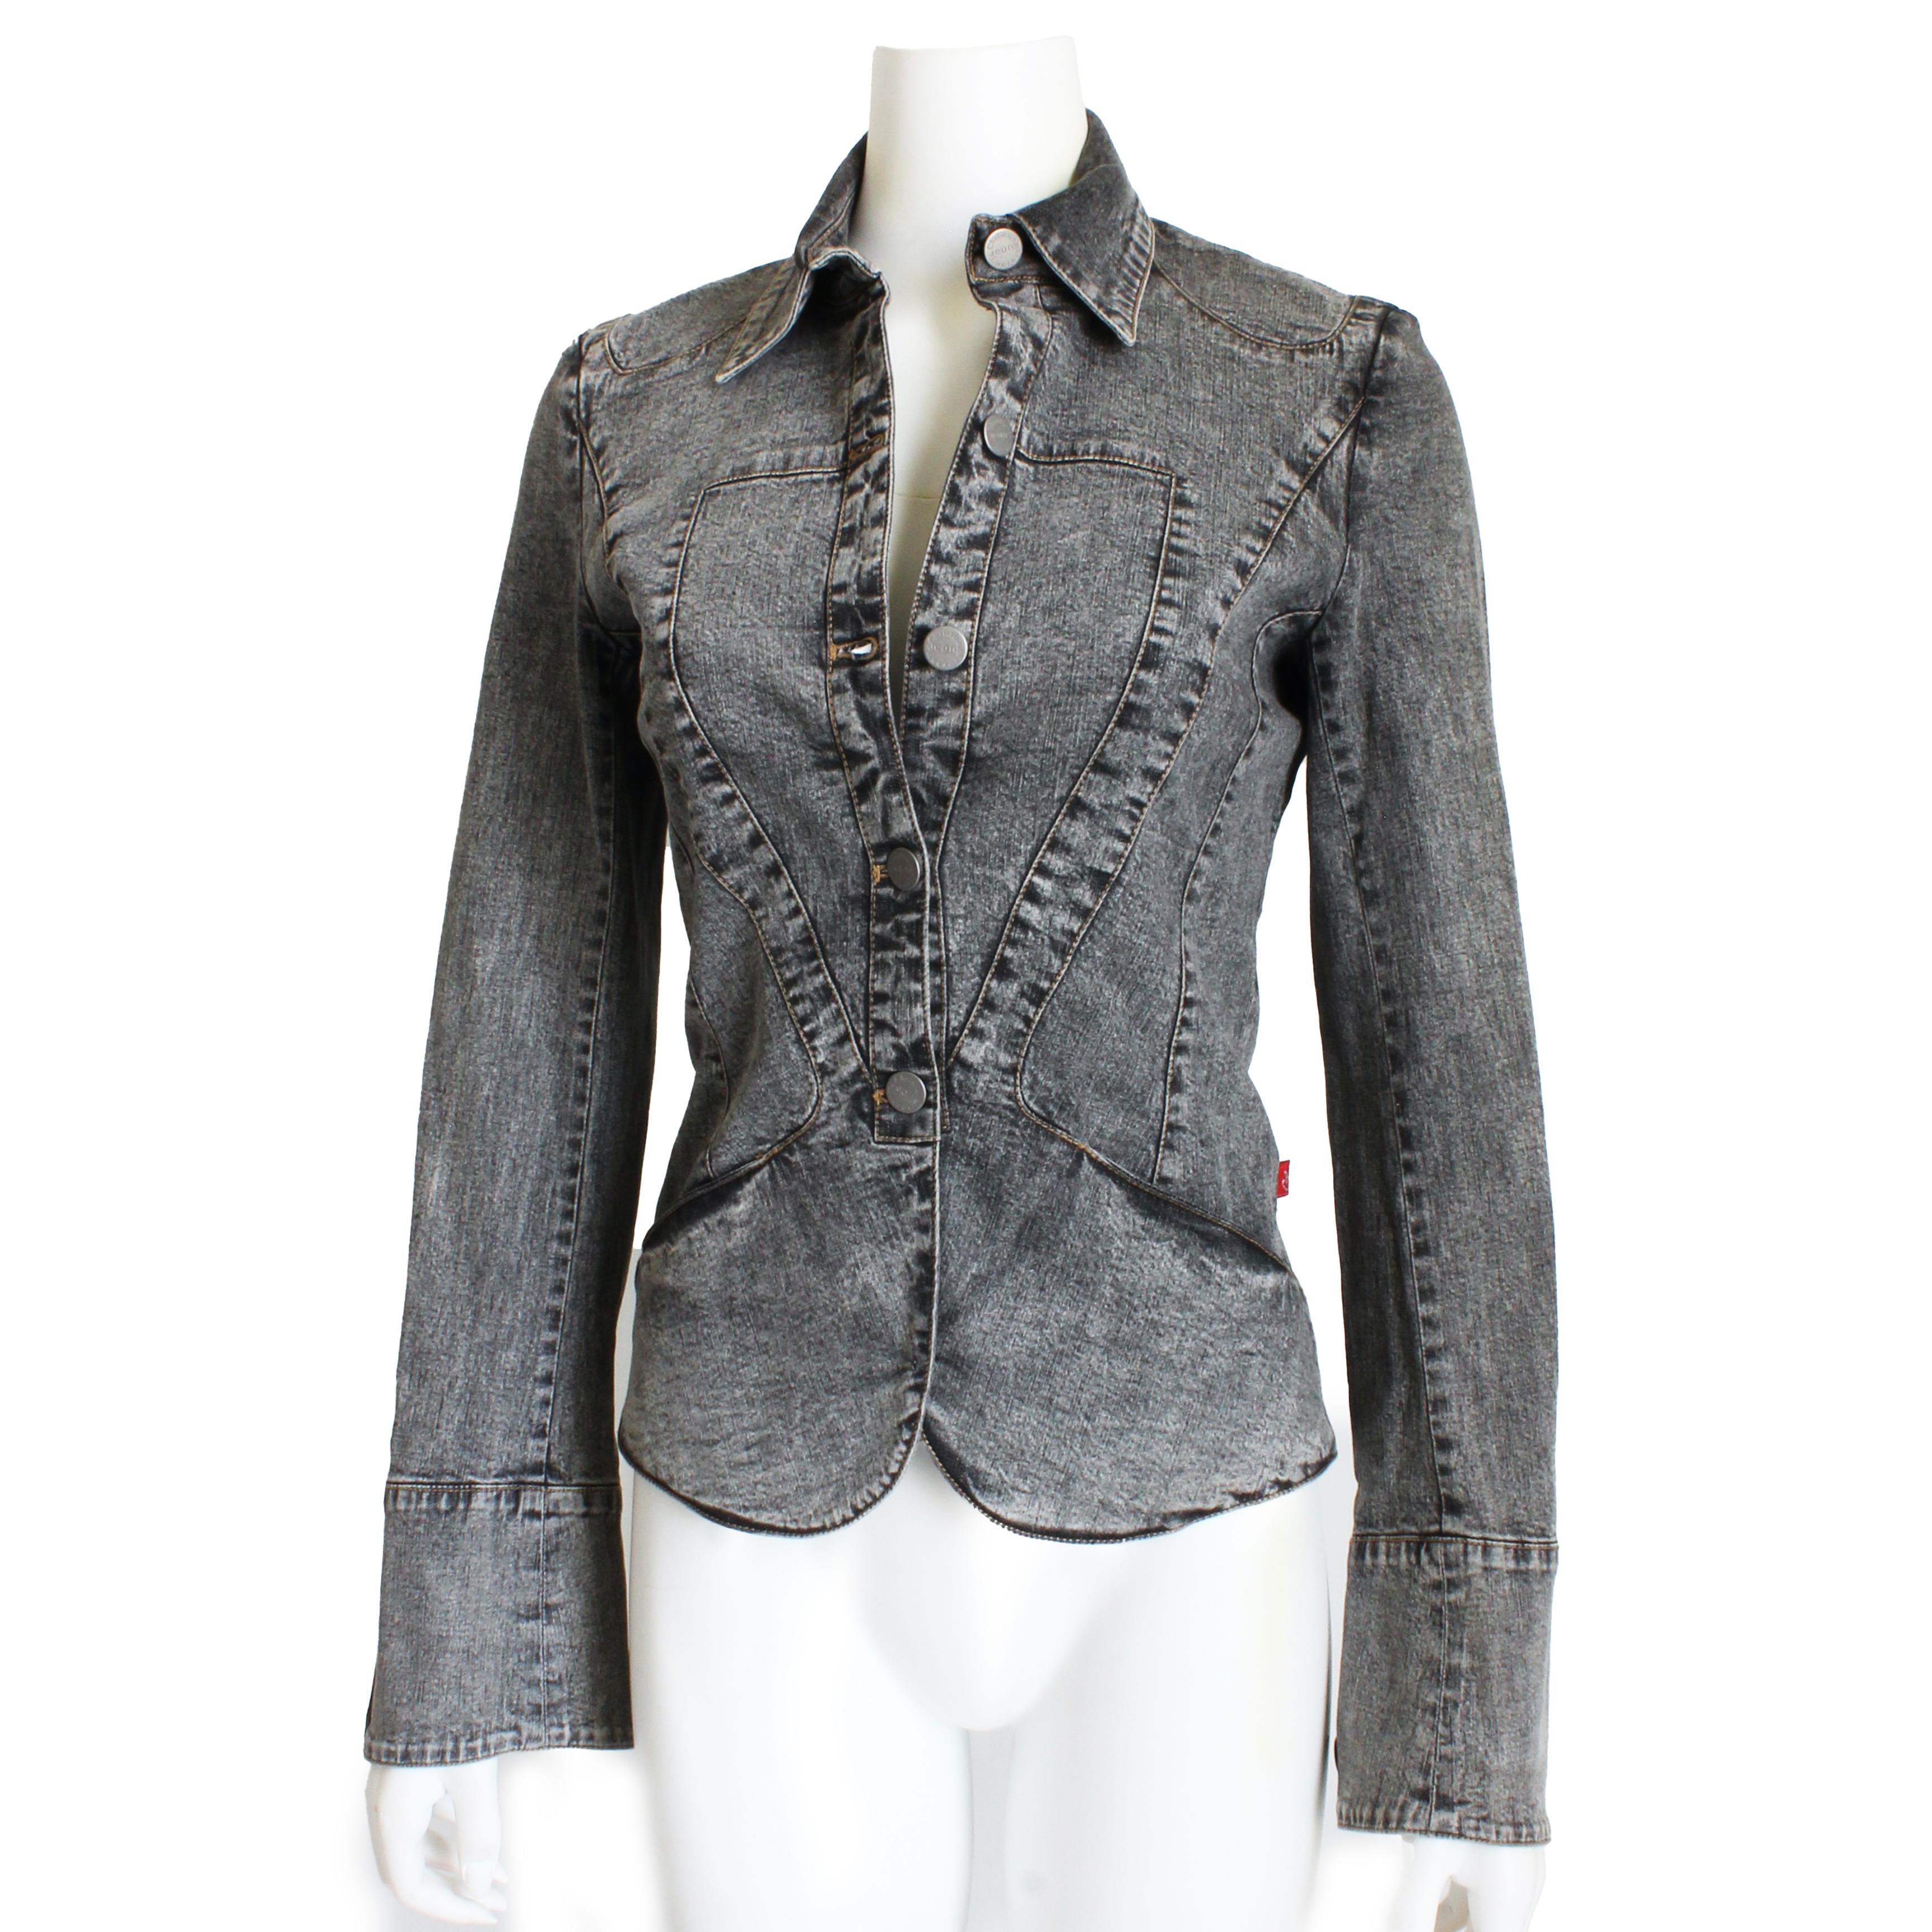 Preowned Christian Lacroix denim jacket, likely made in the early 2000s.  Made from a distressed black cotton denim, this chic little jacket features bell cuffs, a cropped cut and a wonderful embellished heart, trimmed in denim fringe, on the